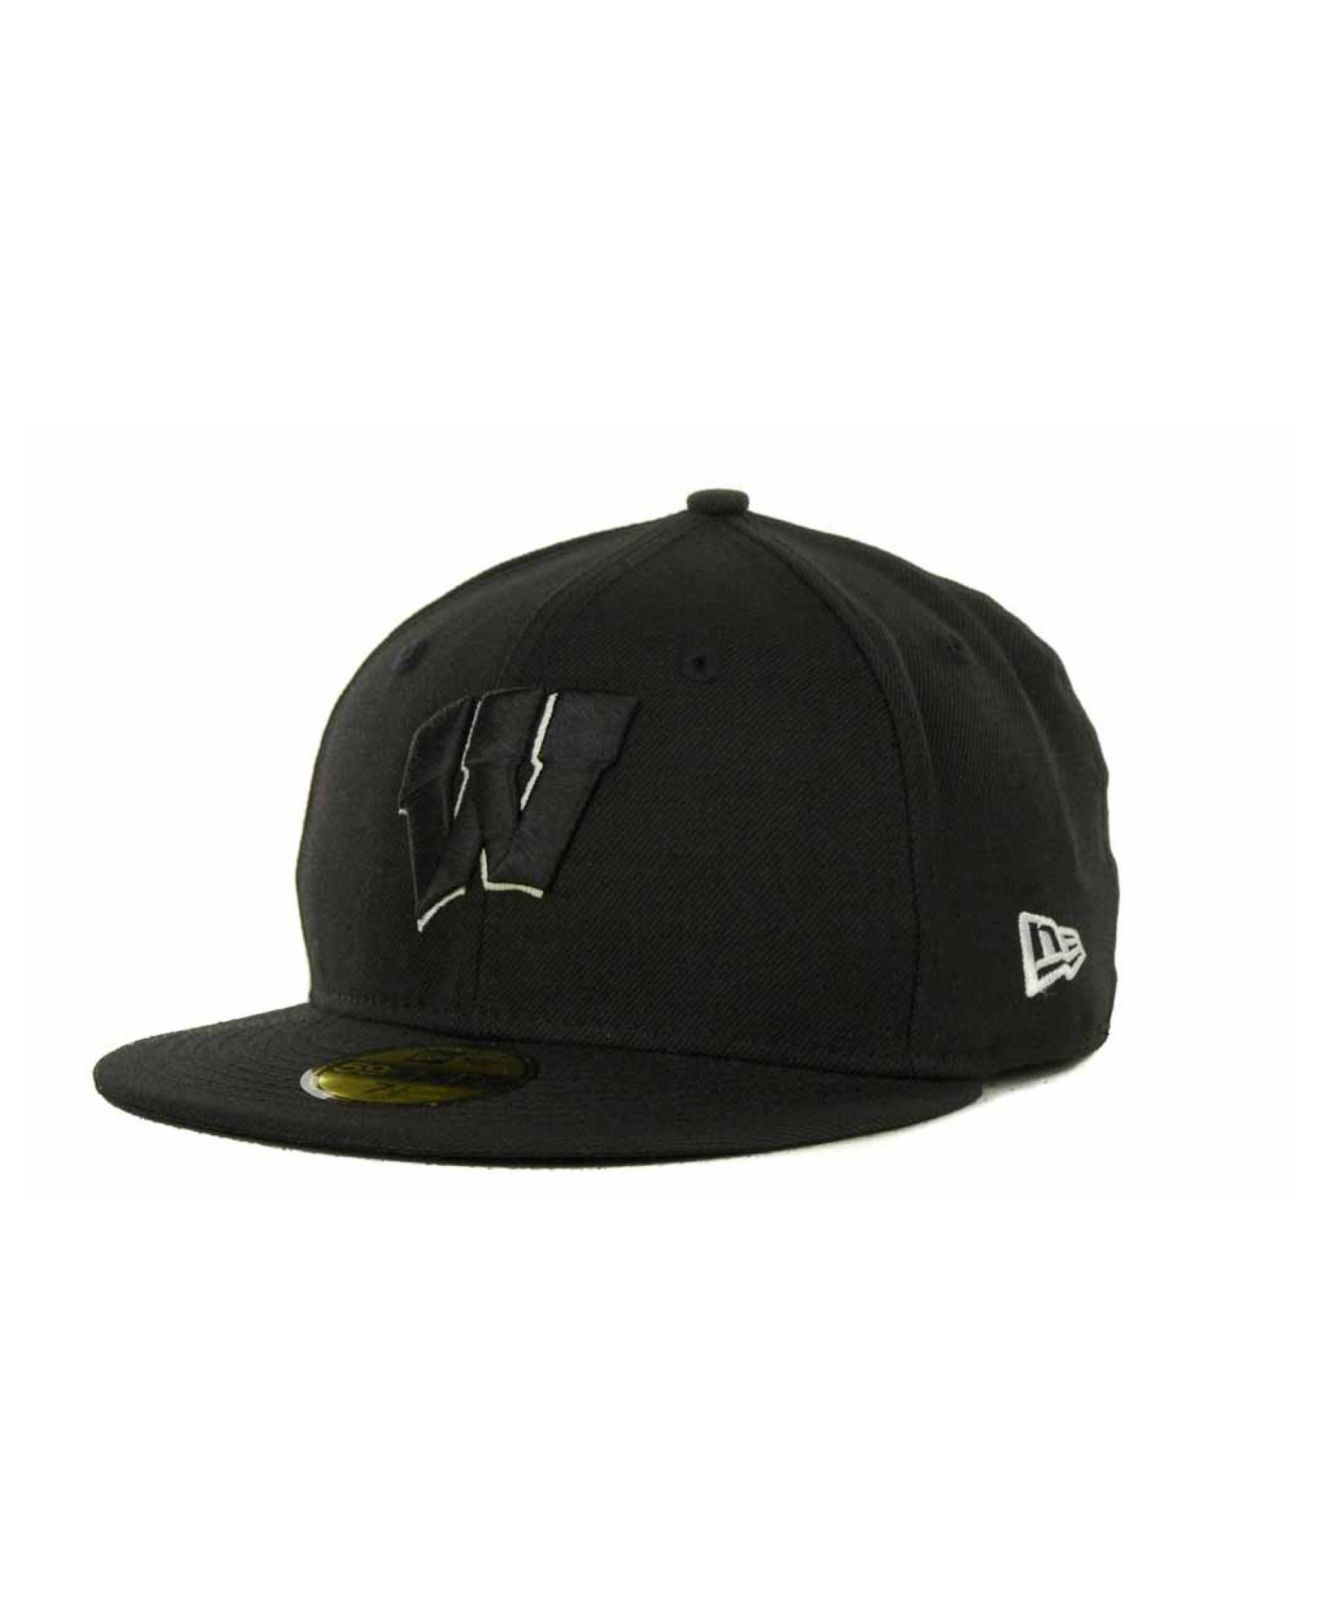 KTZ Wisconsin Badgers Black On Black With White 59Fifty Cap for